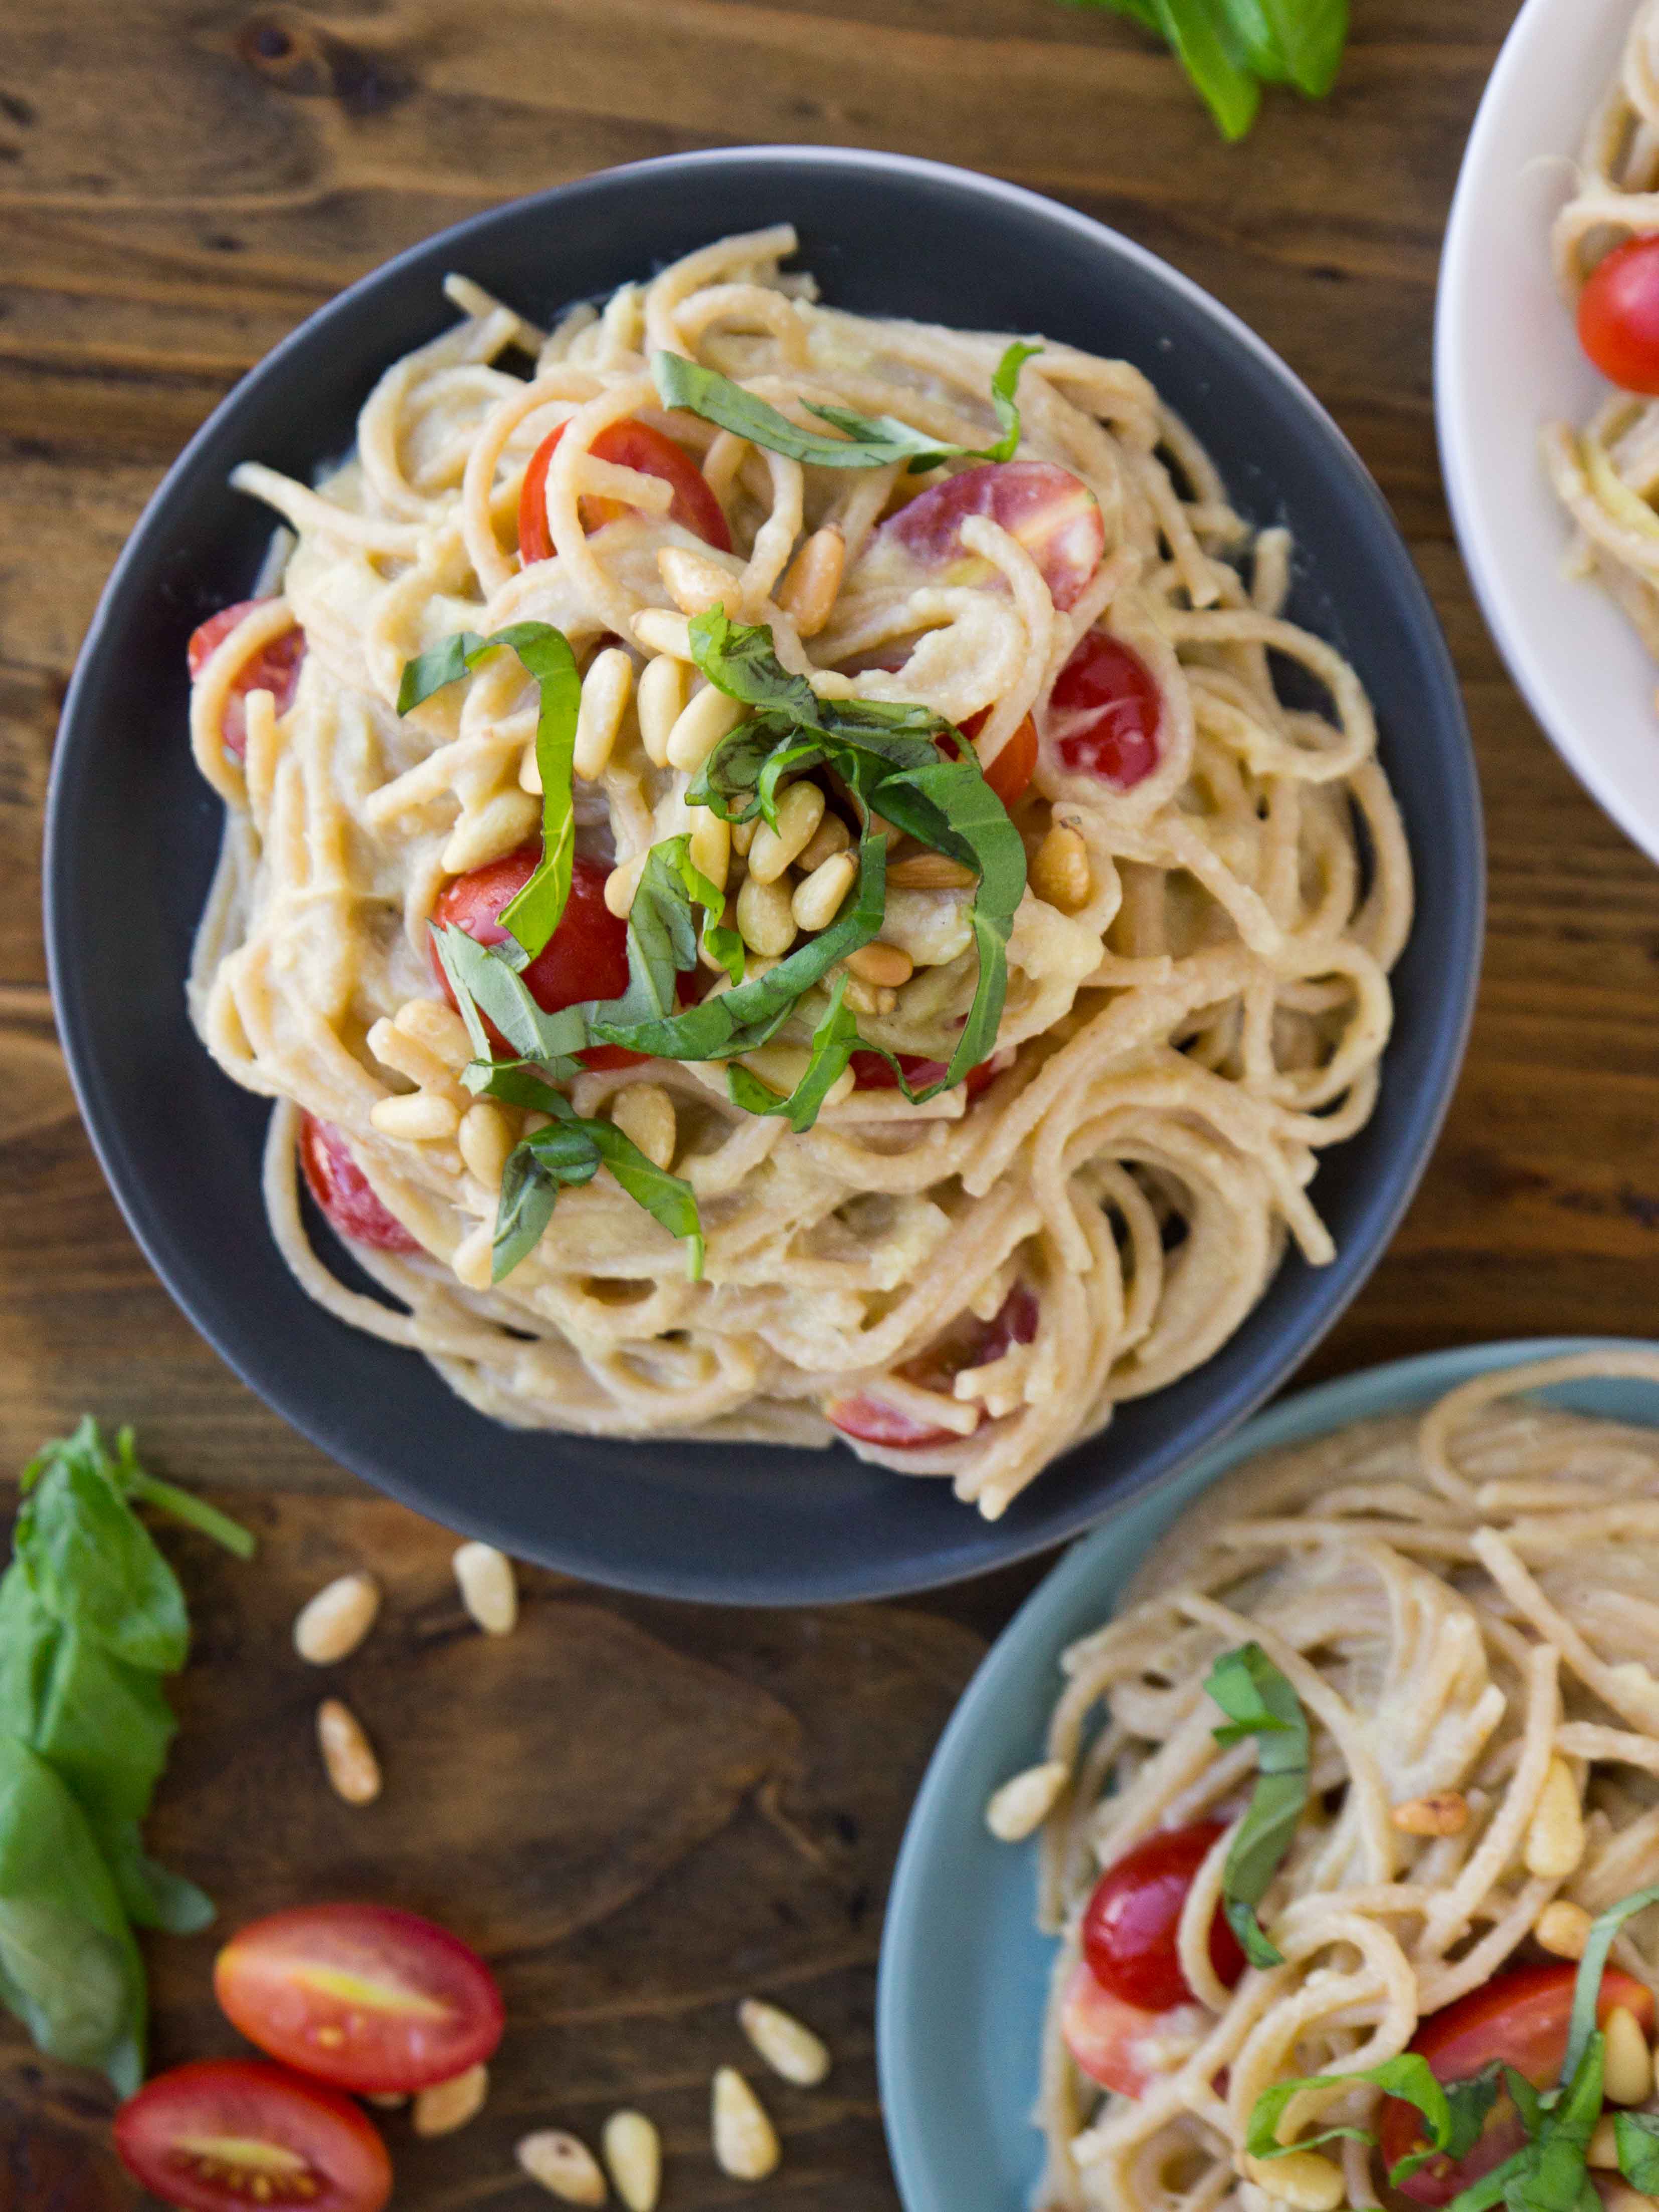 Creamy Lemon Artichoke Pasta - an easy, flavor-packed #vegan pasta that can be whipped up in 15 minutes!